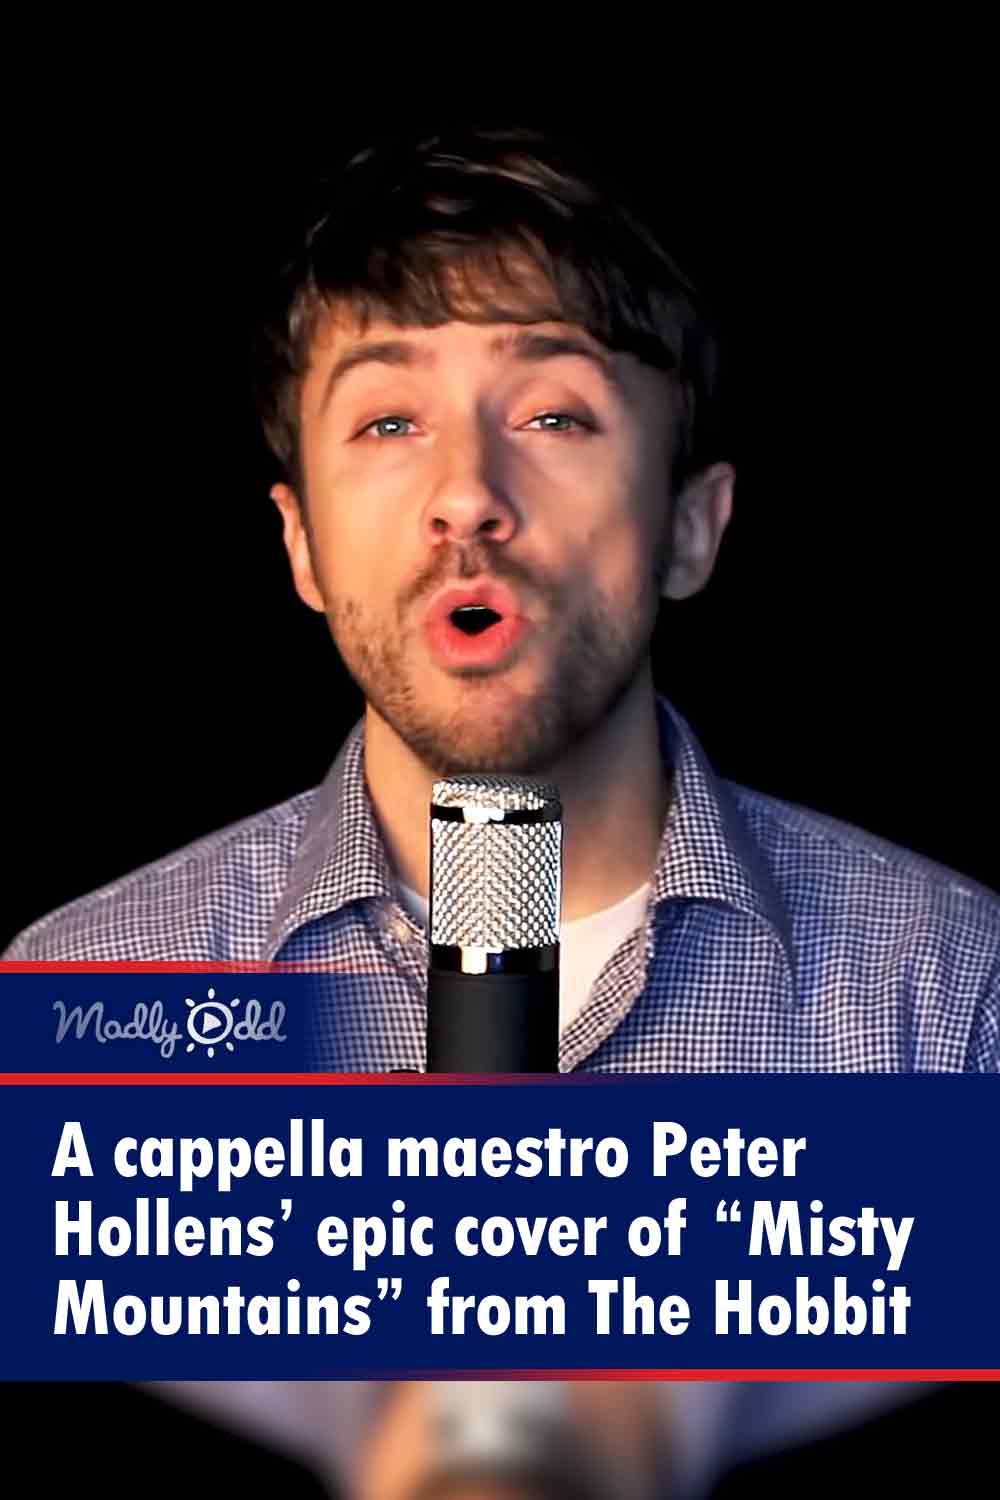 A cappella maestro Peter Hollens’ epic cover of “Misty Mountains” from The Hobbit